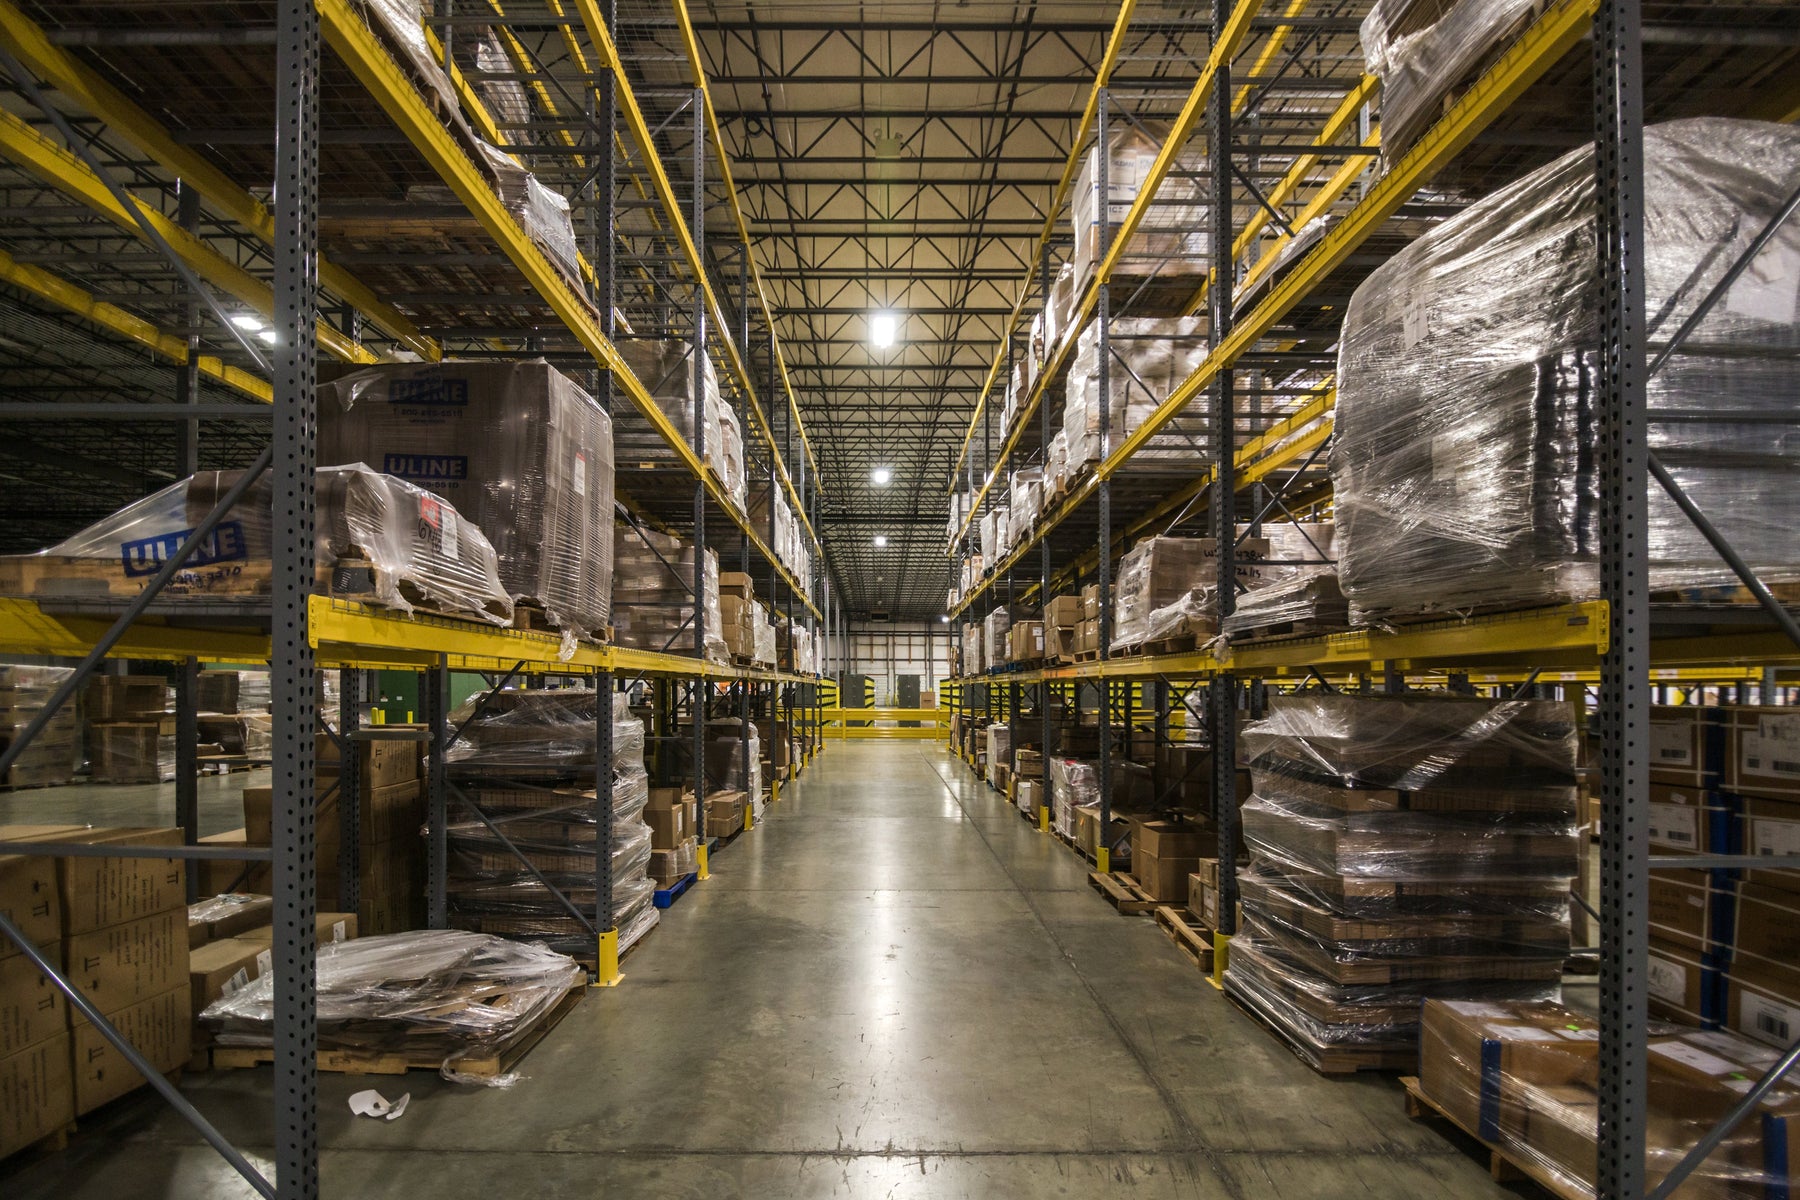 Warehouse picking trolleys: Our expert’s 5 tips